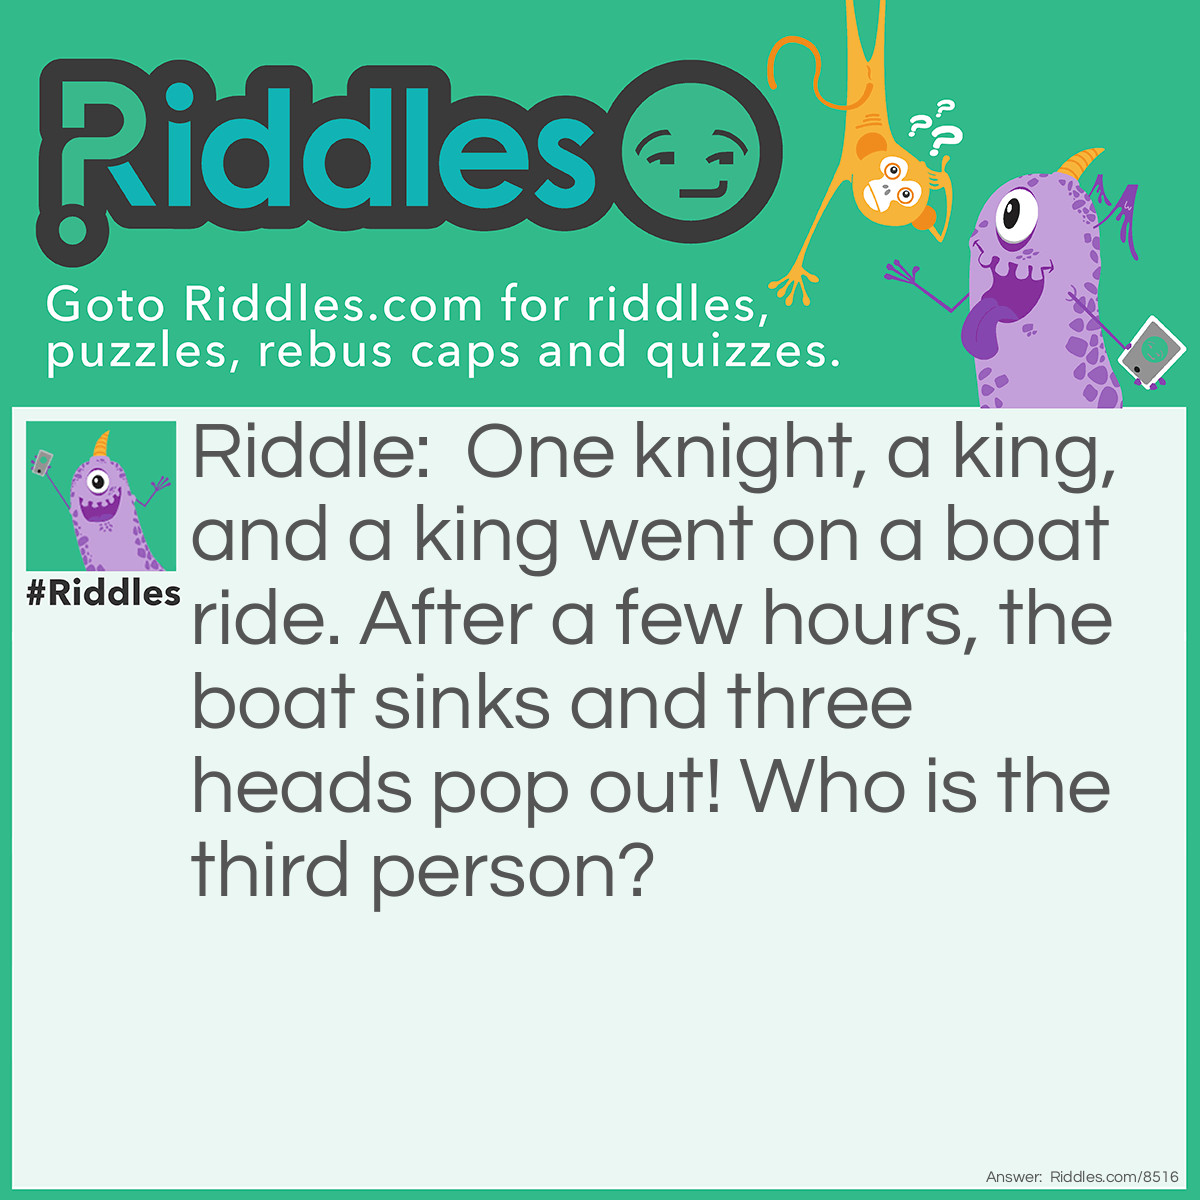 Riddle: One knight, a king, and a king went on a boat ride. After a few hours, the boat sinks and three heads pop out! Who is the third person? Answer: The Knight. (Remember to say this riddle OUT LOUD!)